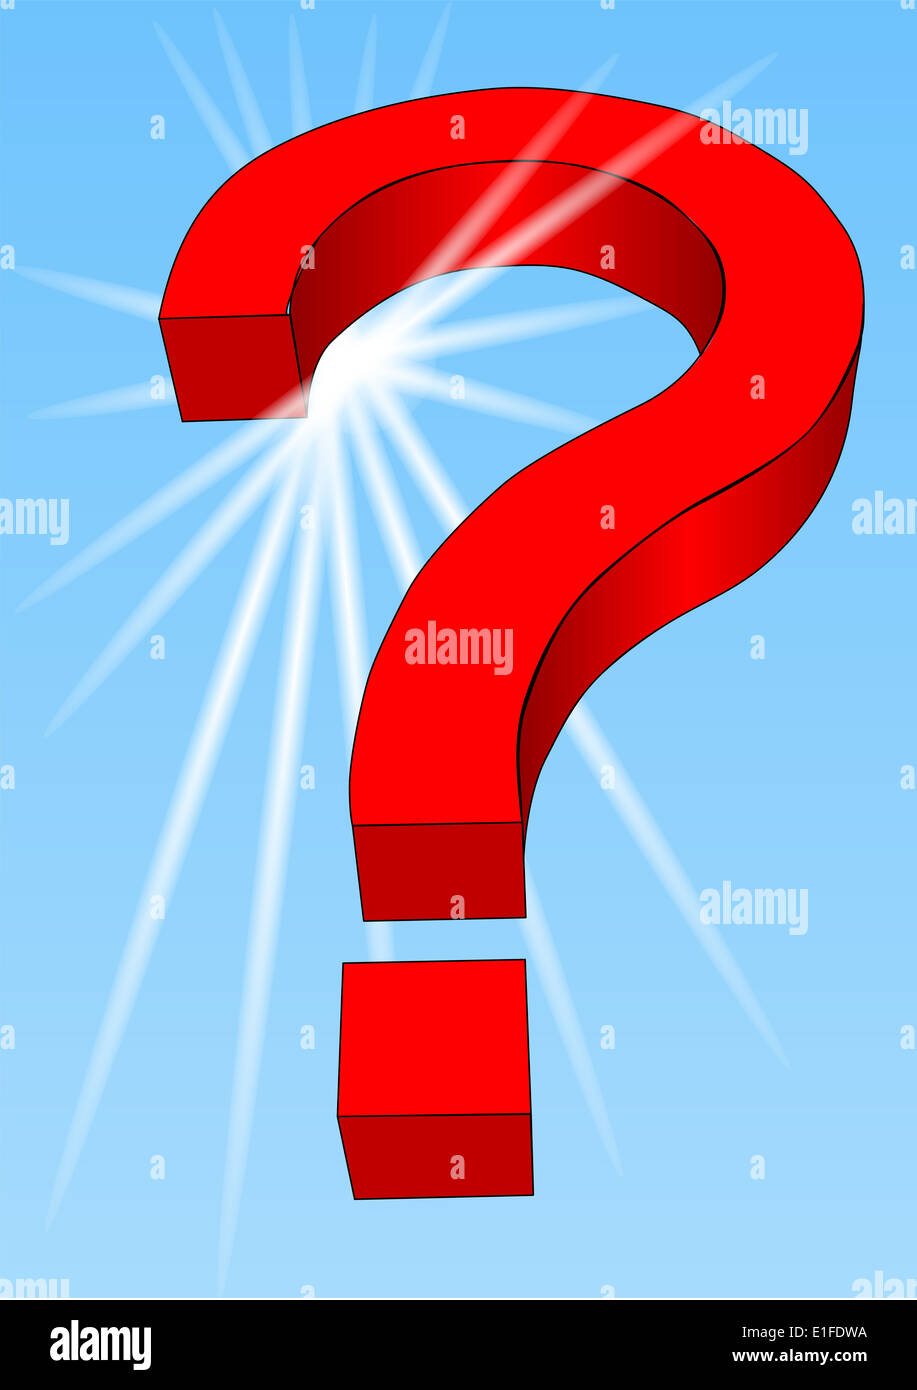 question mark Stock Photo